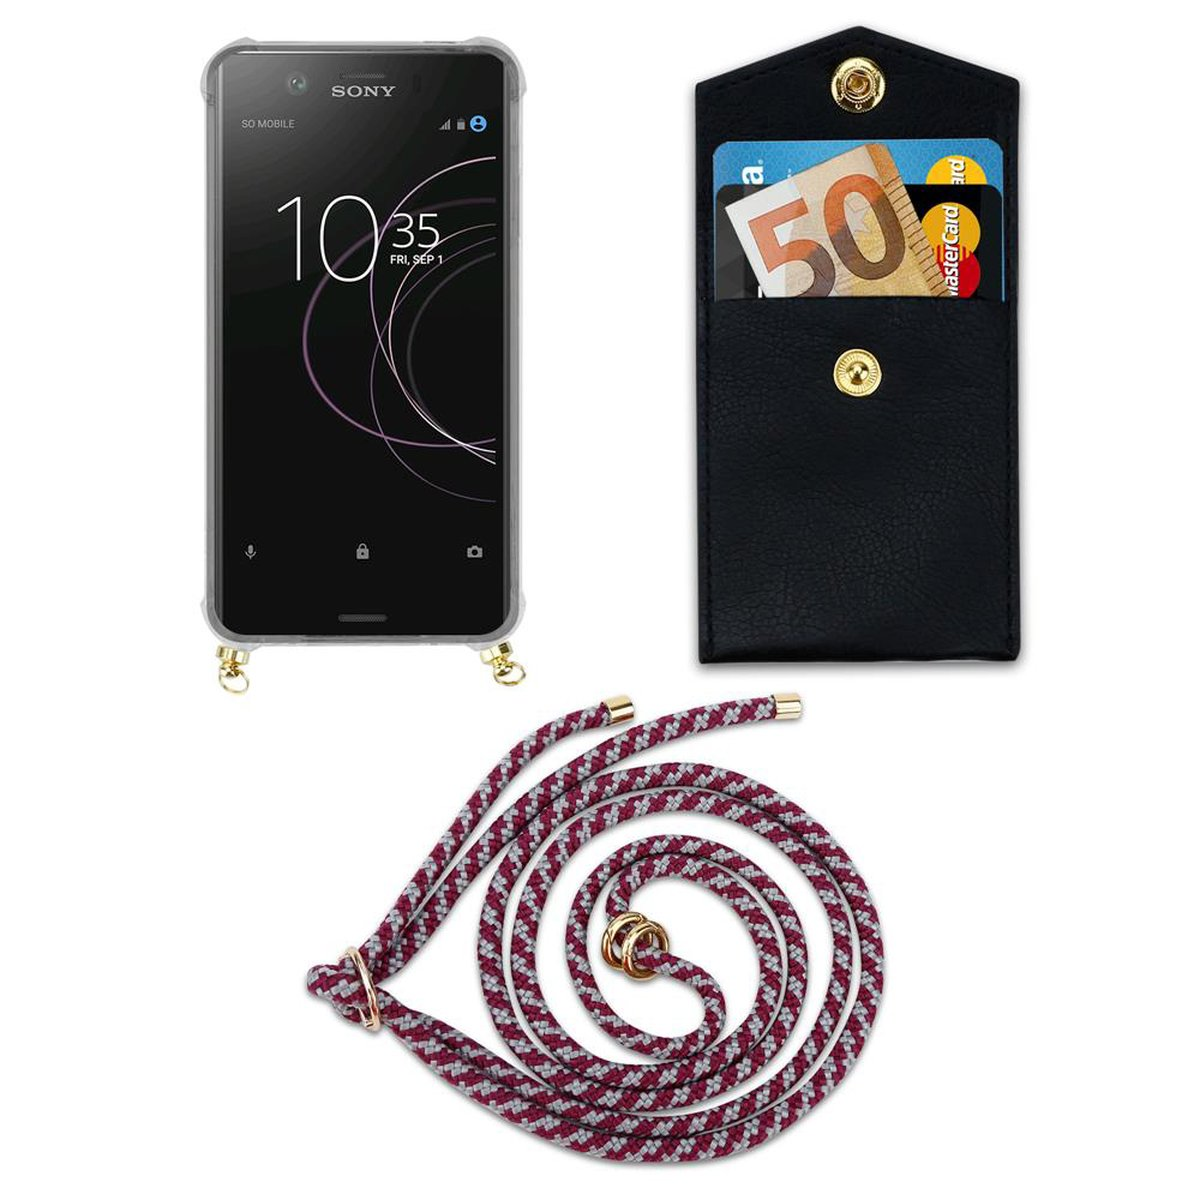 CADORABO Handy Backcover, ROT Hülle, Sony, COMPACT, Kette Gold und Ringen, Band abnehmbarer XZ1 mit WEIß Xperia Kordel